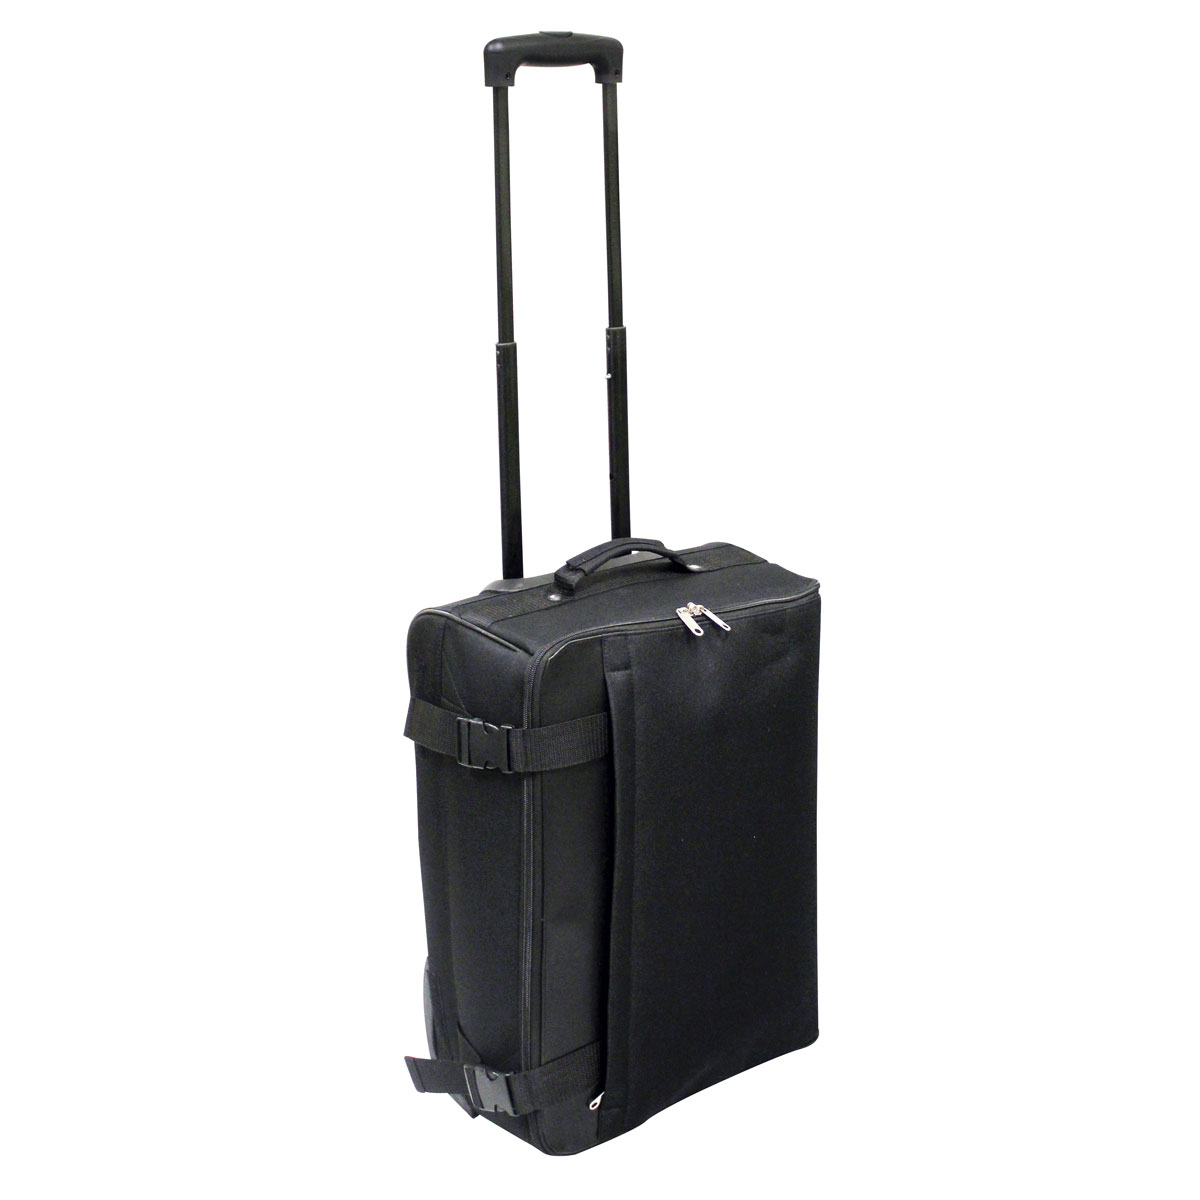 Picture of Preferred Nation P9026.BLK 20 in. Folding Luggage, Black